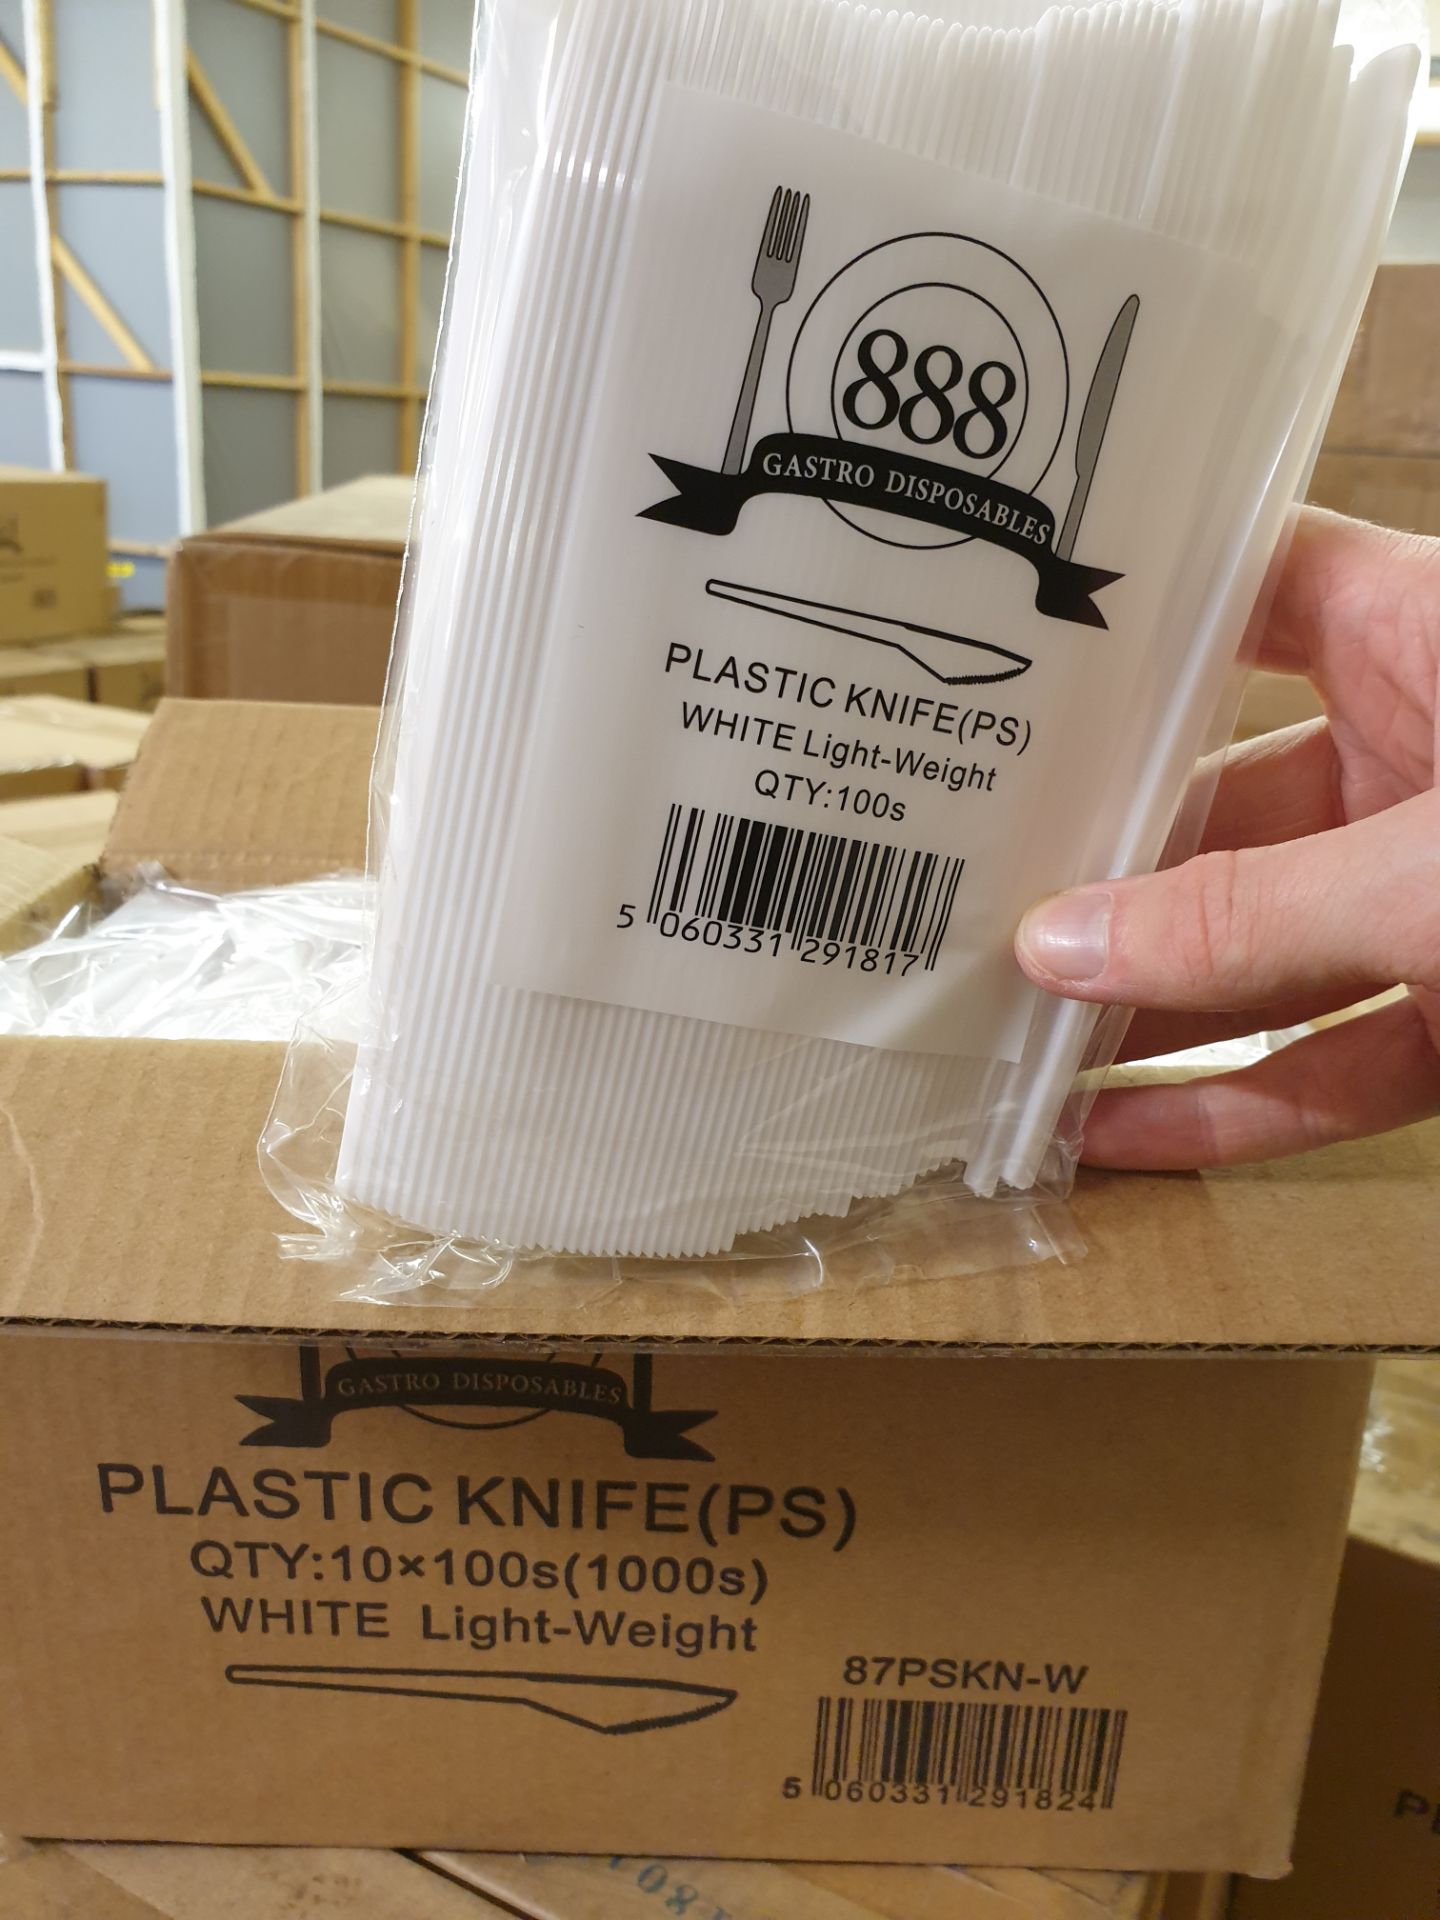 5 x Boxes of 1000 White Plastic Knives by 888 Gastro Disposables